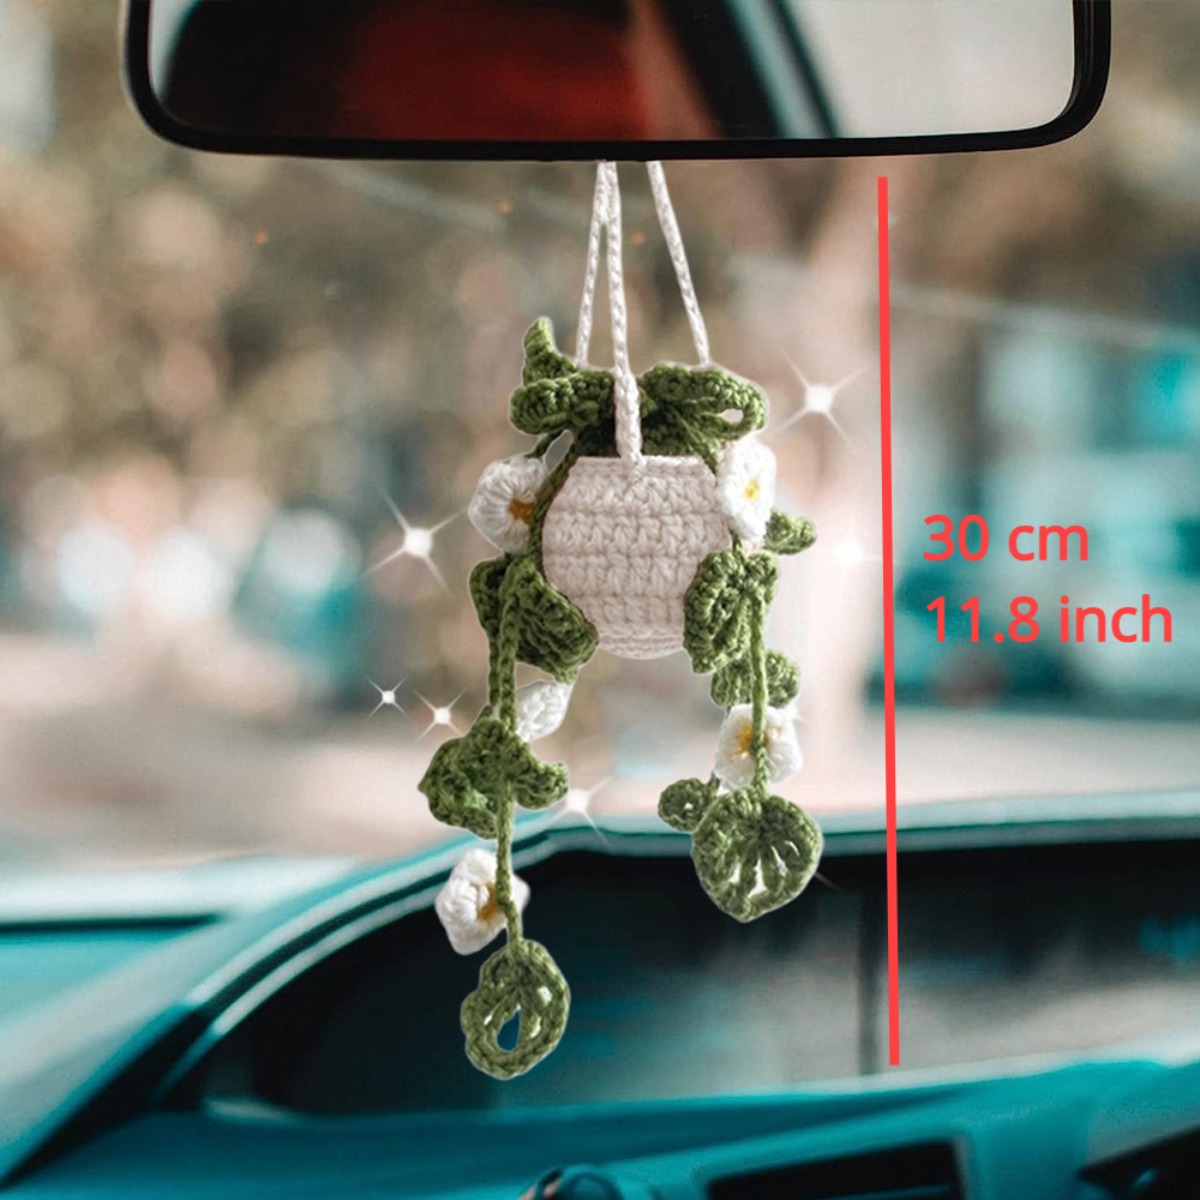 Cute Car Hanging Accessories, Rear View Mirror Charm, Gift for New Car,  Crochet Animal Car Ornament, New Driver Gift, Valentine's Day Gift. 